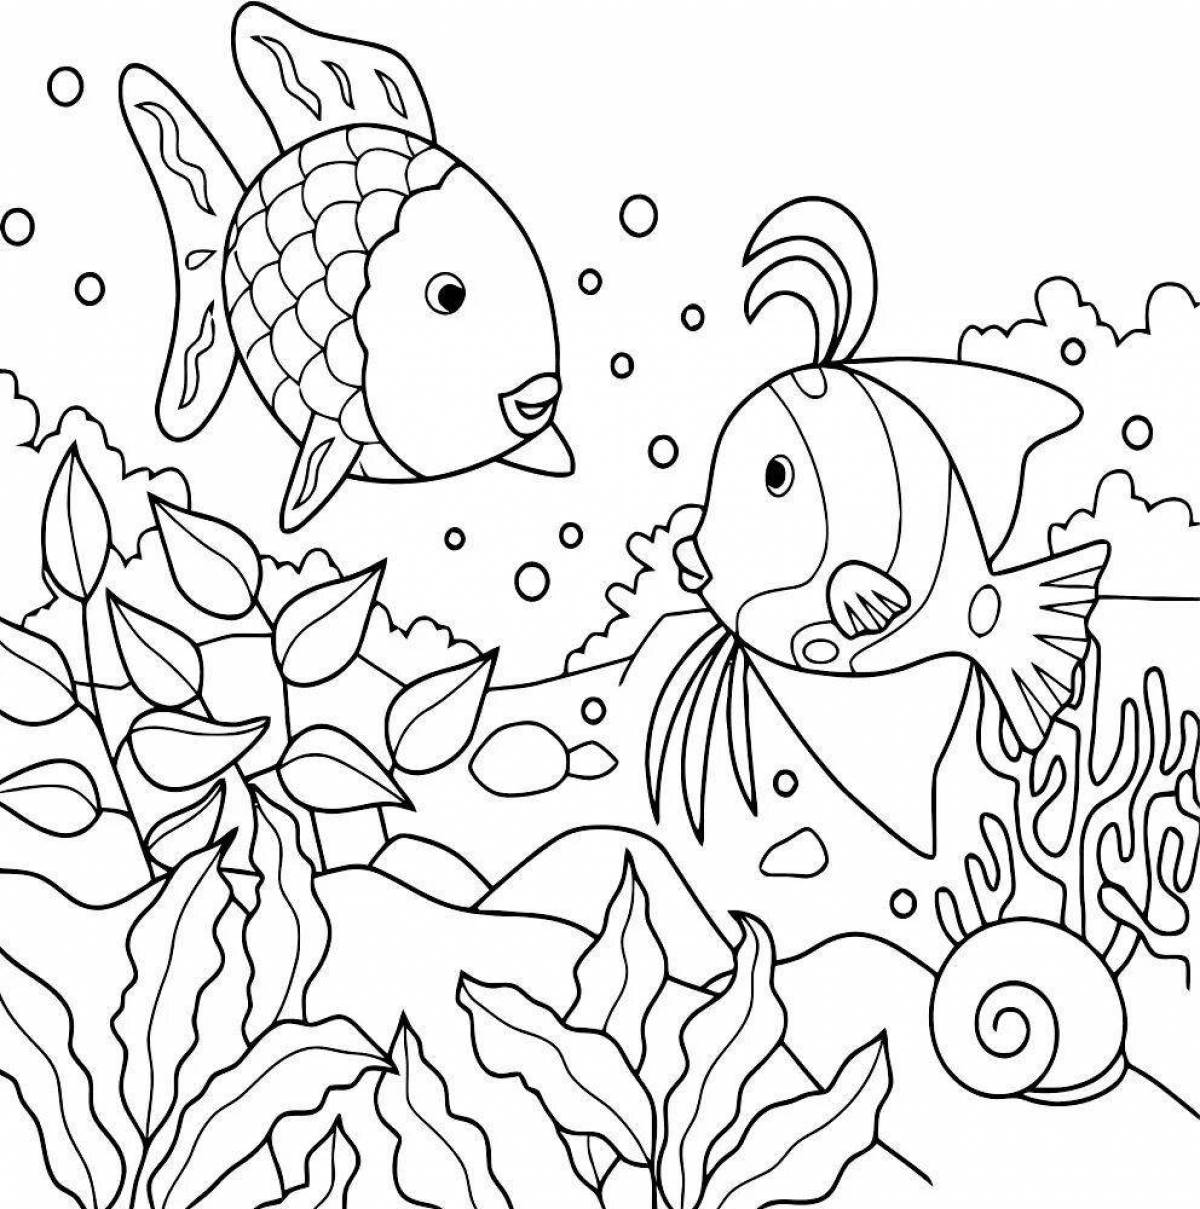 Adorable fish coloring book for kids 6-7 years old